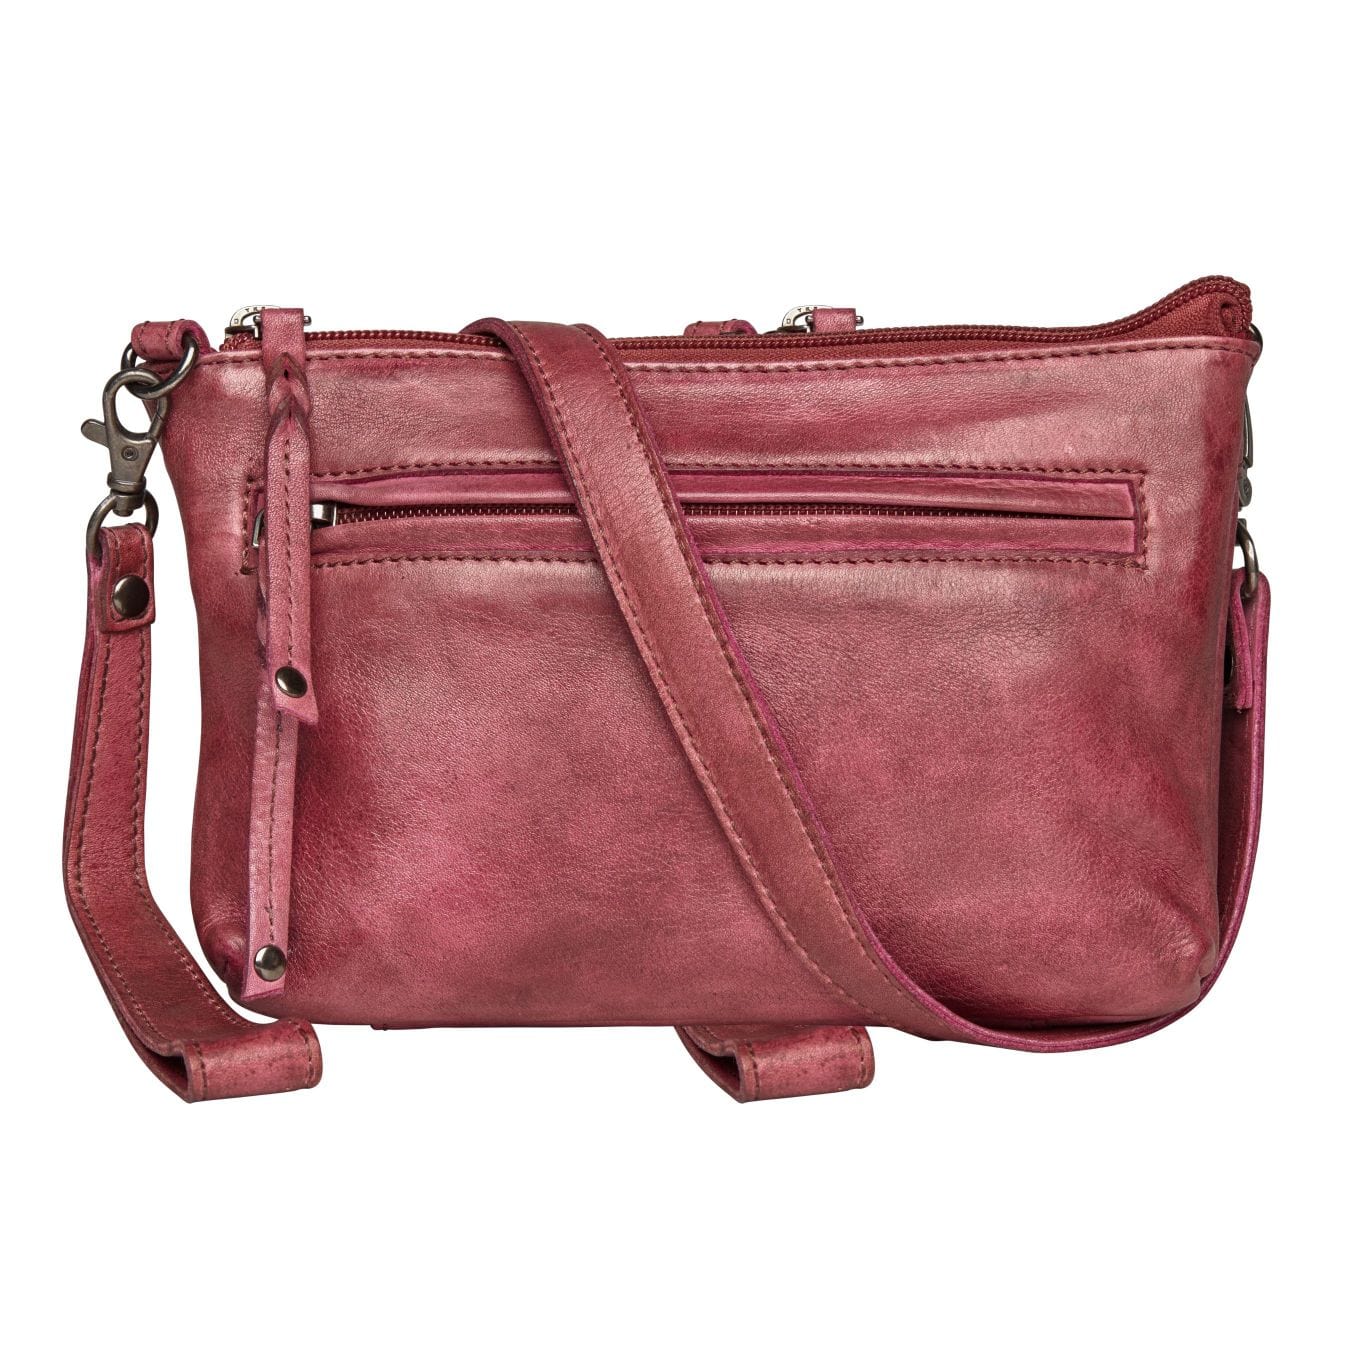 Concealed Carry Amelia Leather high quality Crossbody women's bags - Designer Concealed Carry Crossbody with Universal Holster - Women Gun Bag